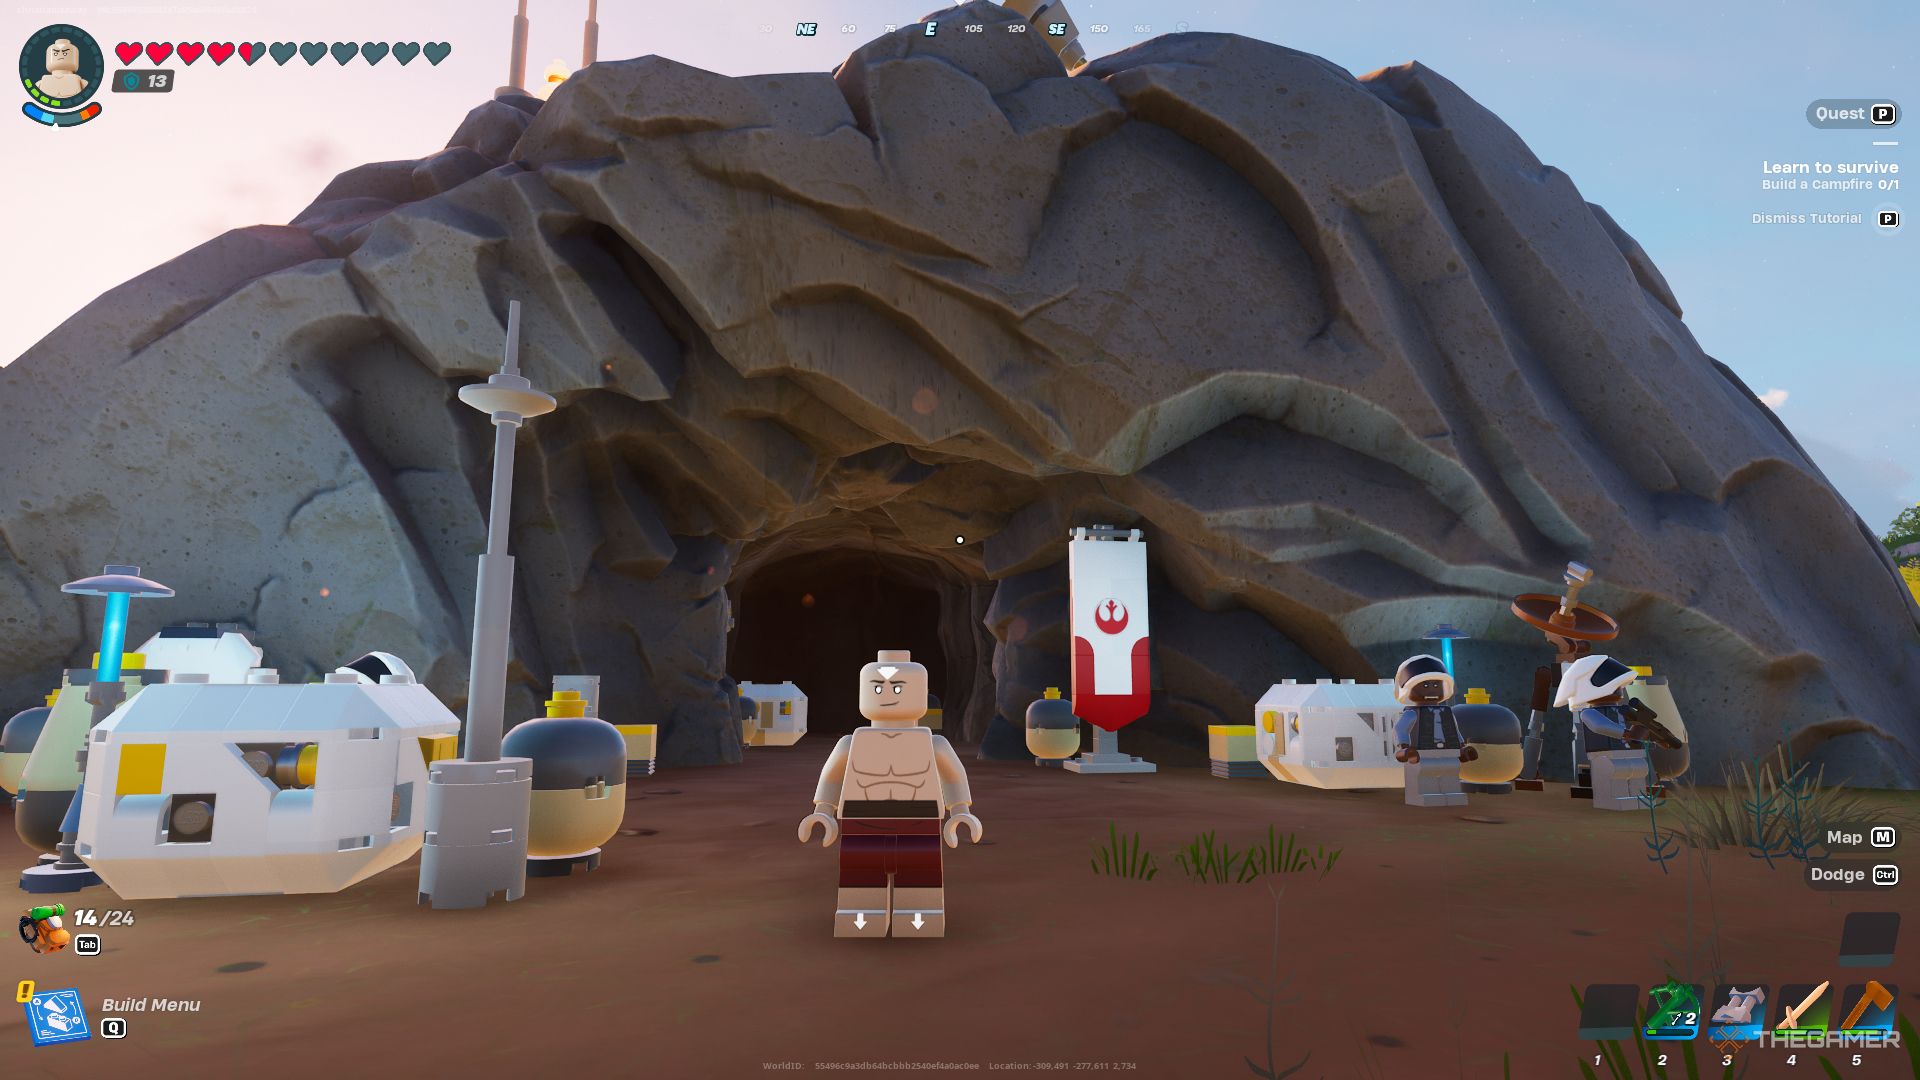 A screenshot from Lego Fortnite showing a player character as Avatar Aang standing outside of a cave with Rebels and the Rebel Alliance banners draped around it.